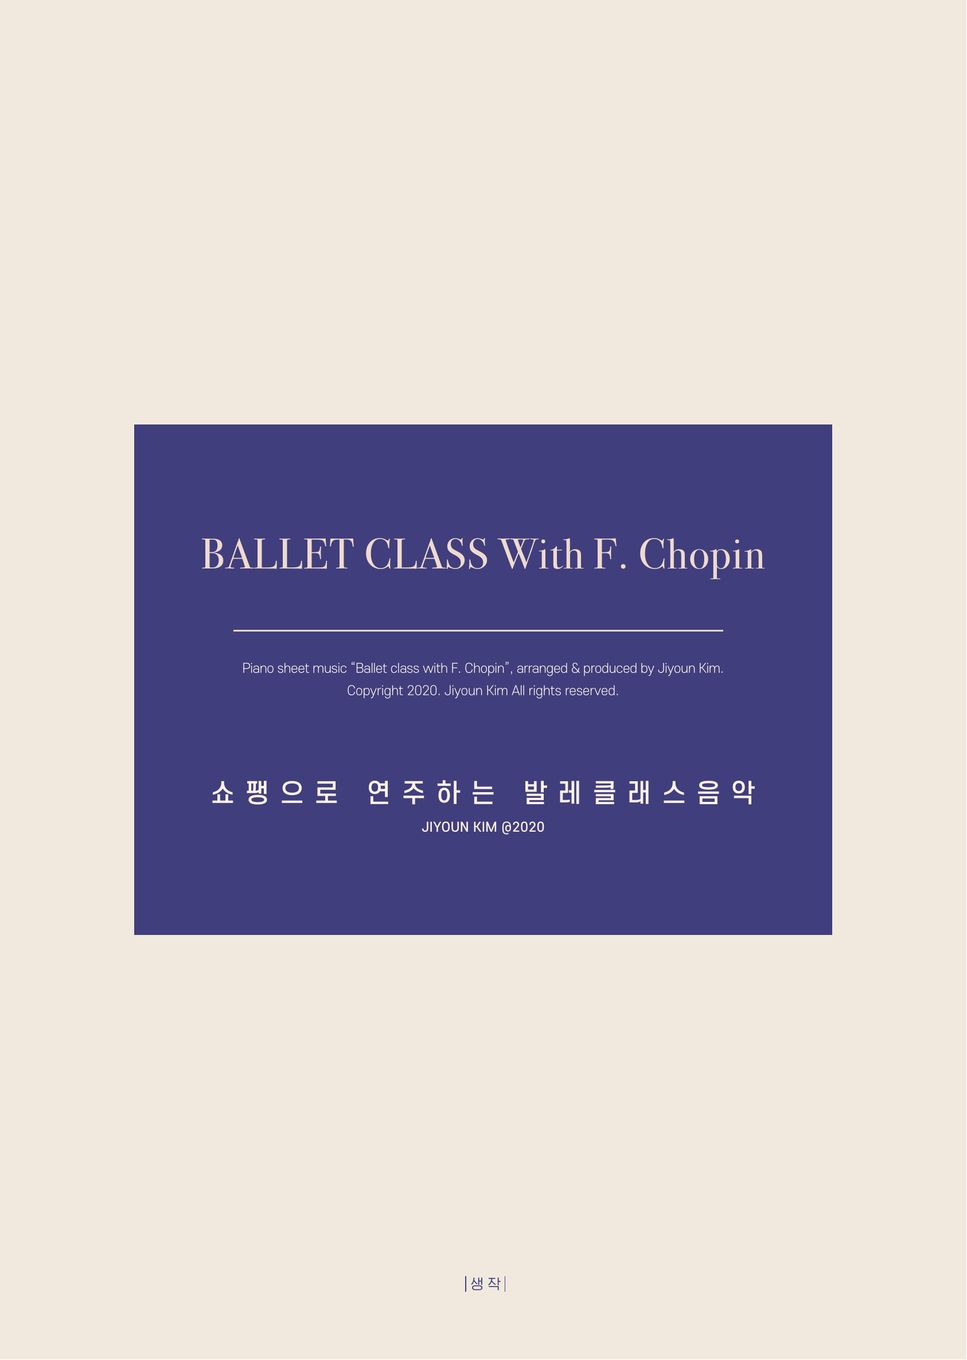 F. Chopin - Ballet Class with F. Chopin - 11. Battements frappes by Jiyoun KIM